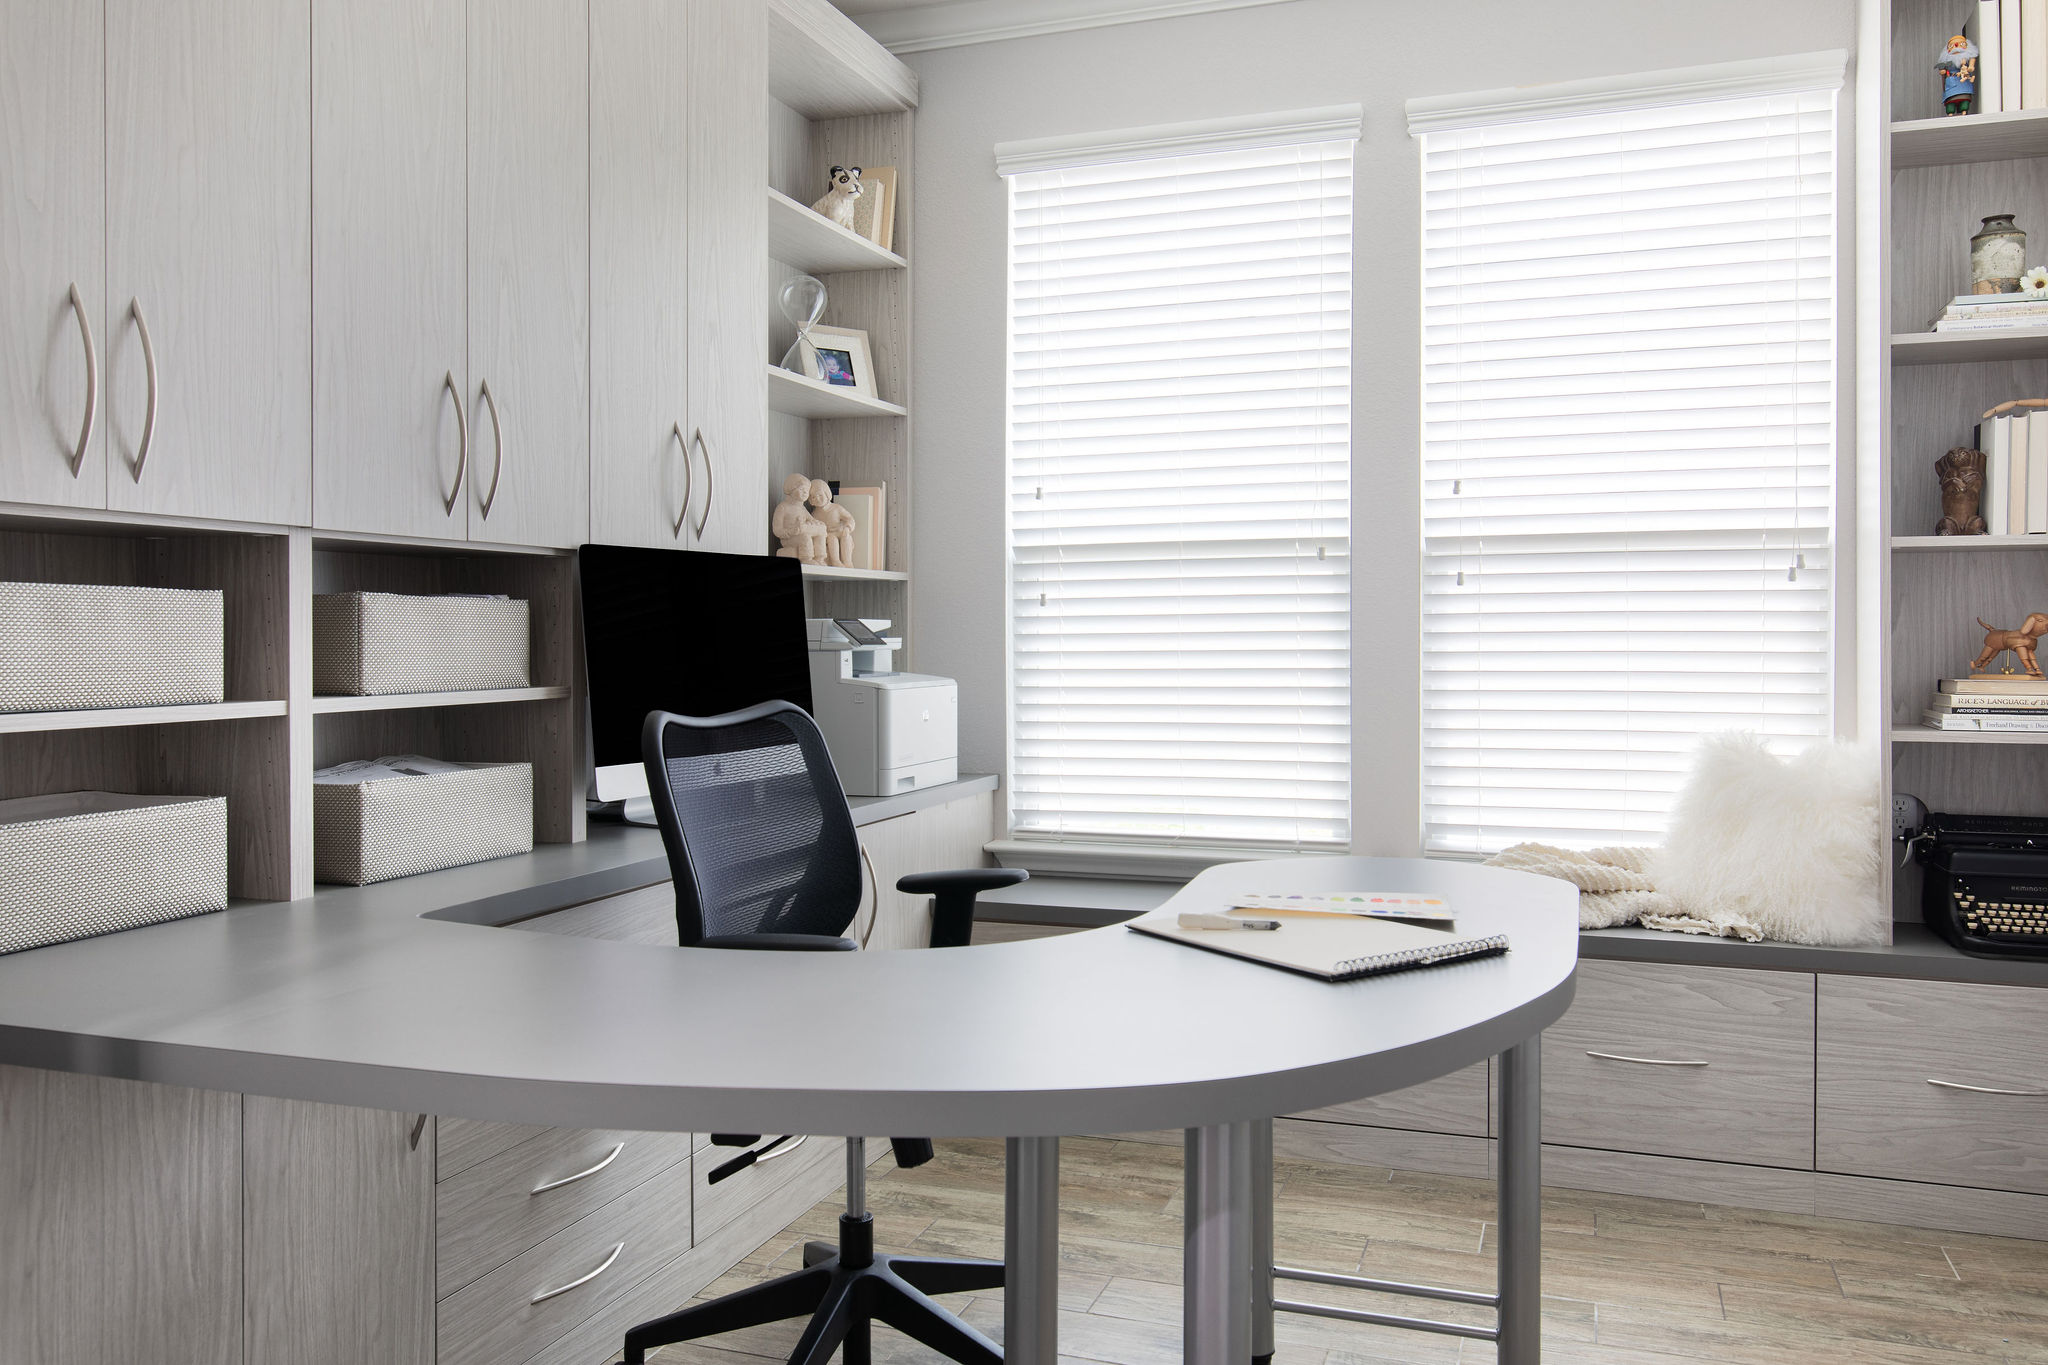 Maximize space with our Home Office. Work from home effortlessly, combining functionality and style. Discover versatile solutions for small spaces. Consider a home office design today!”